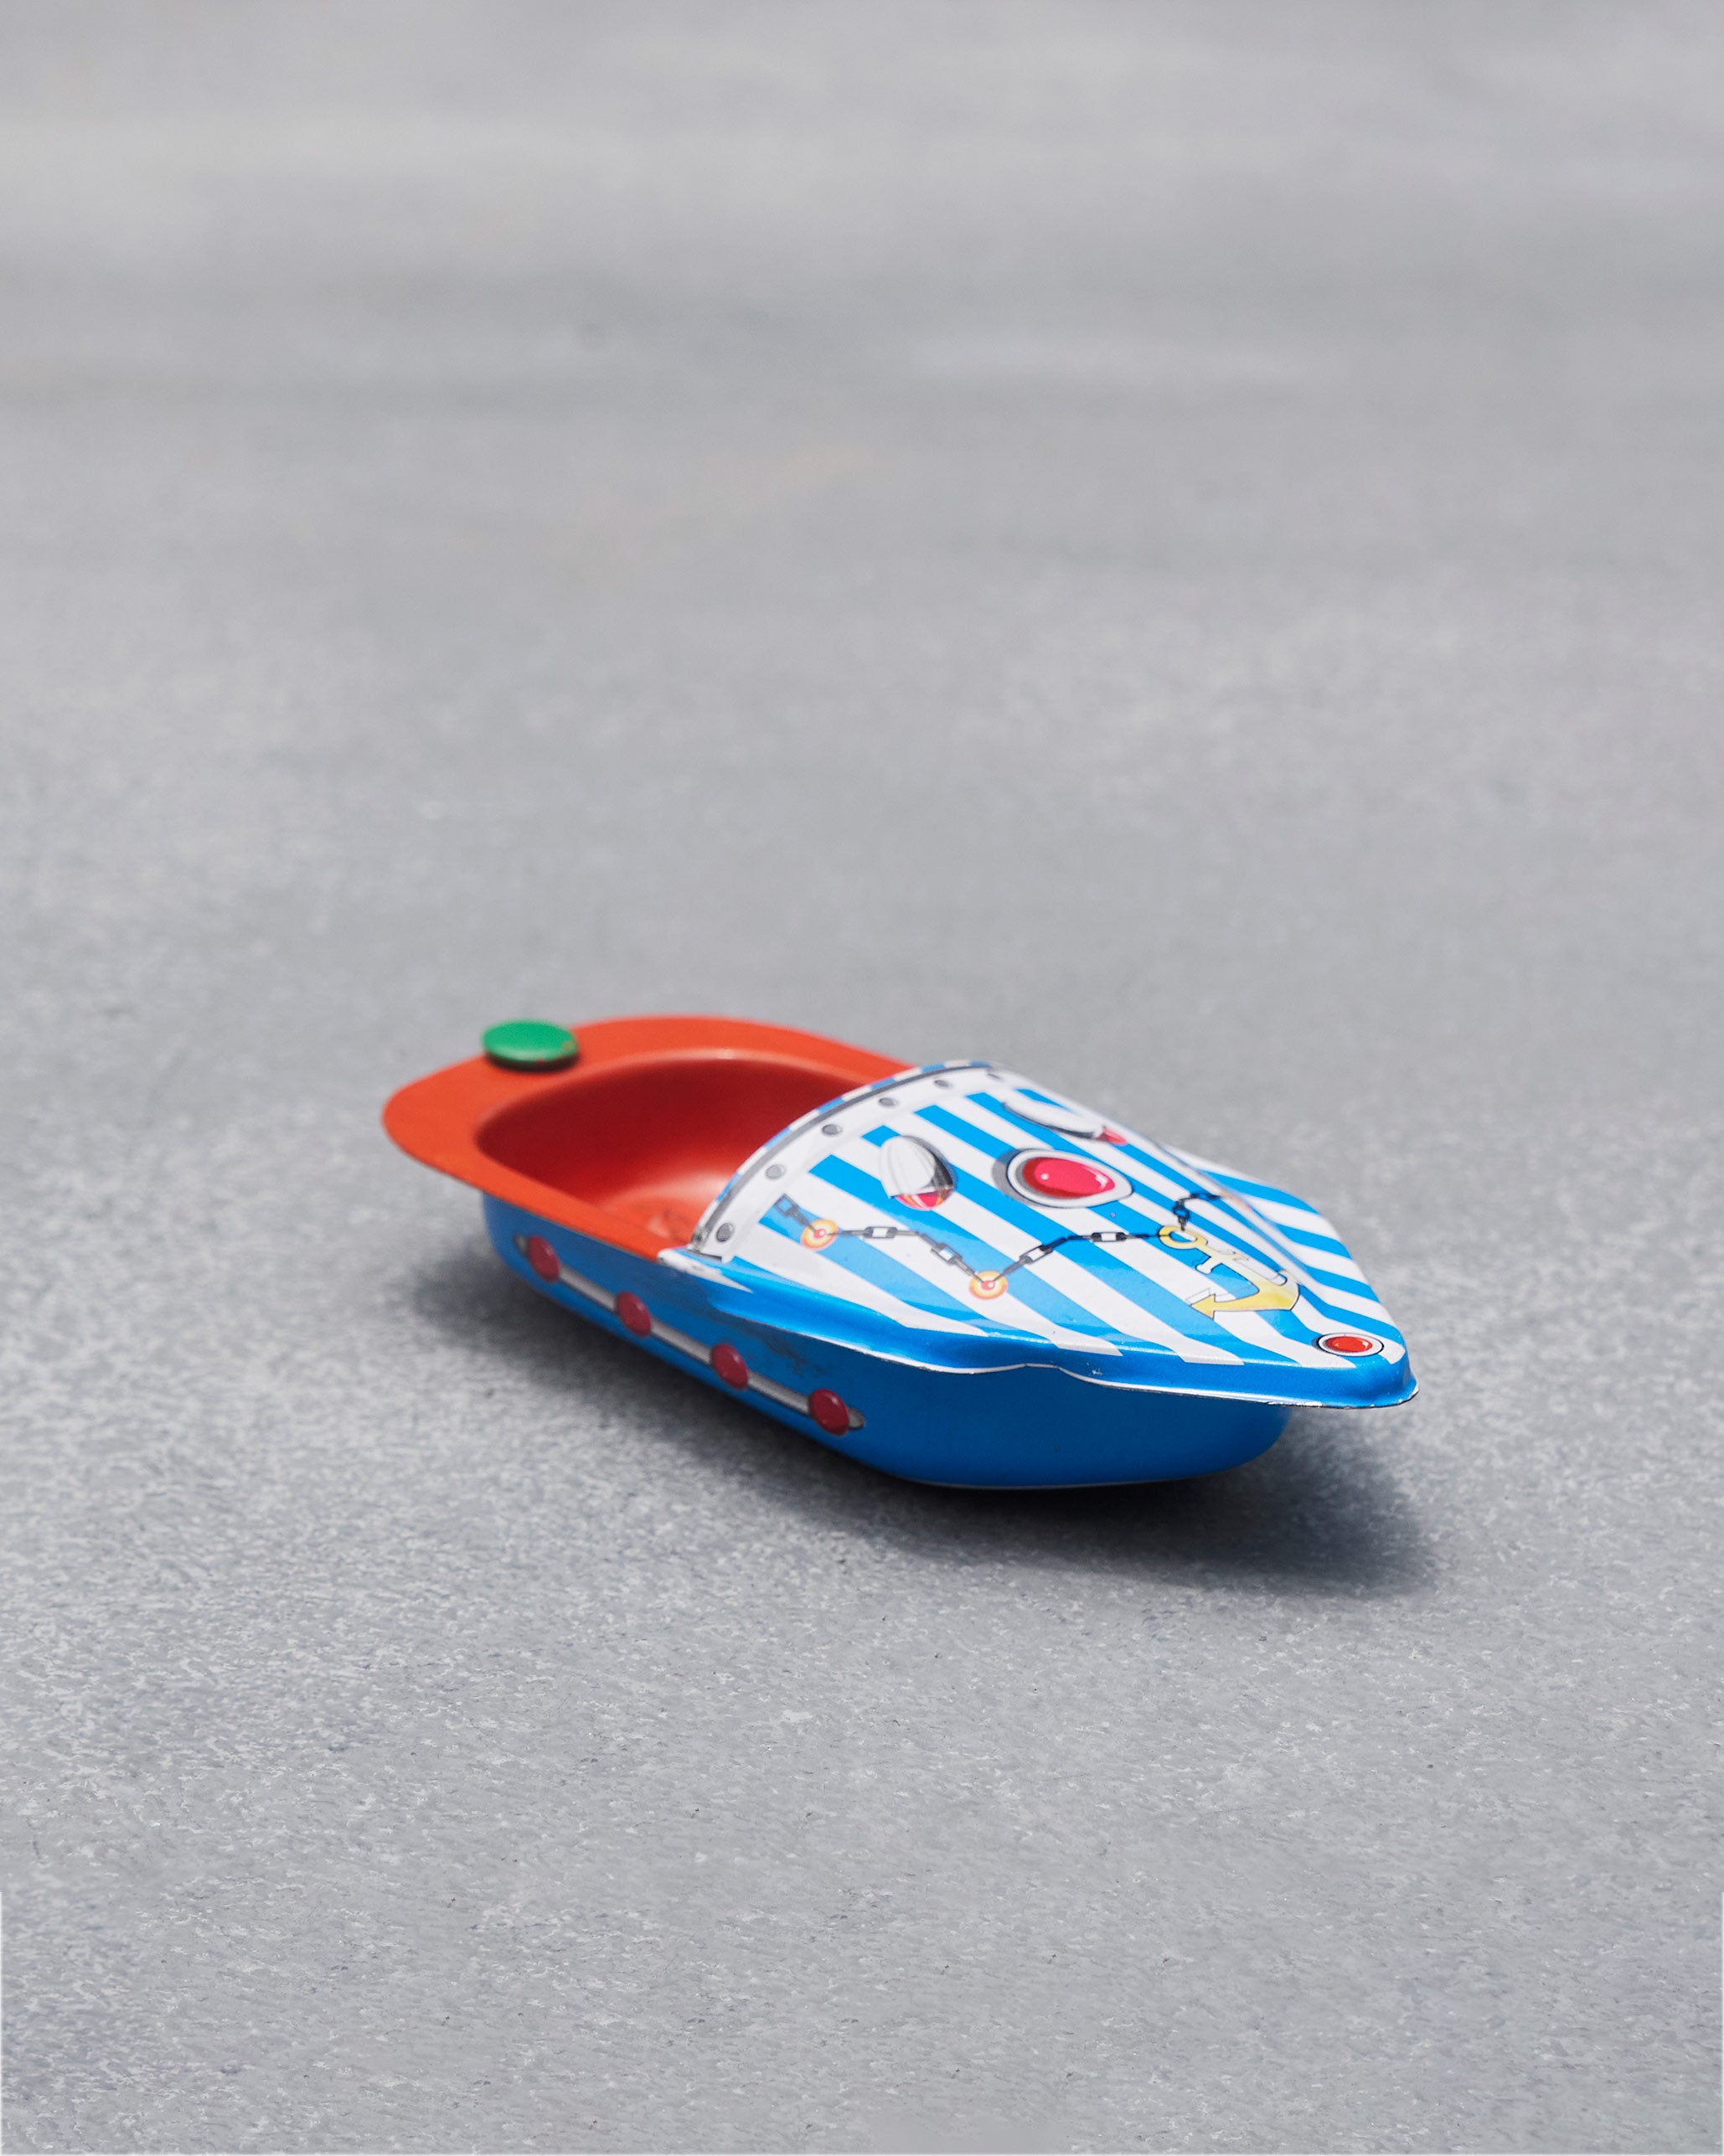 Kampong Boat Toy